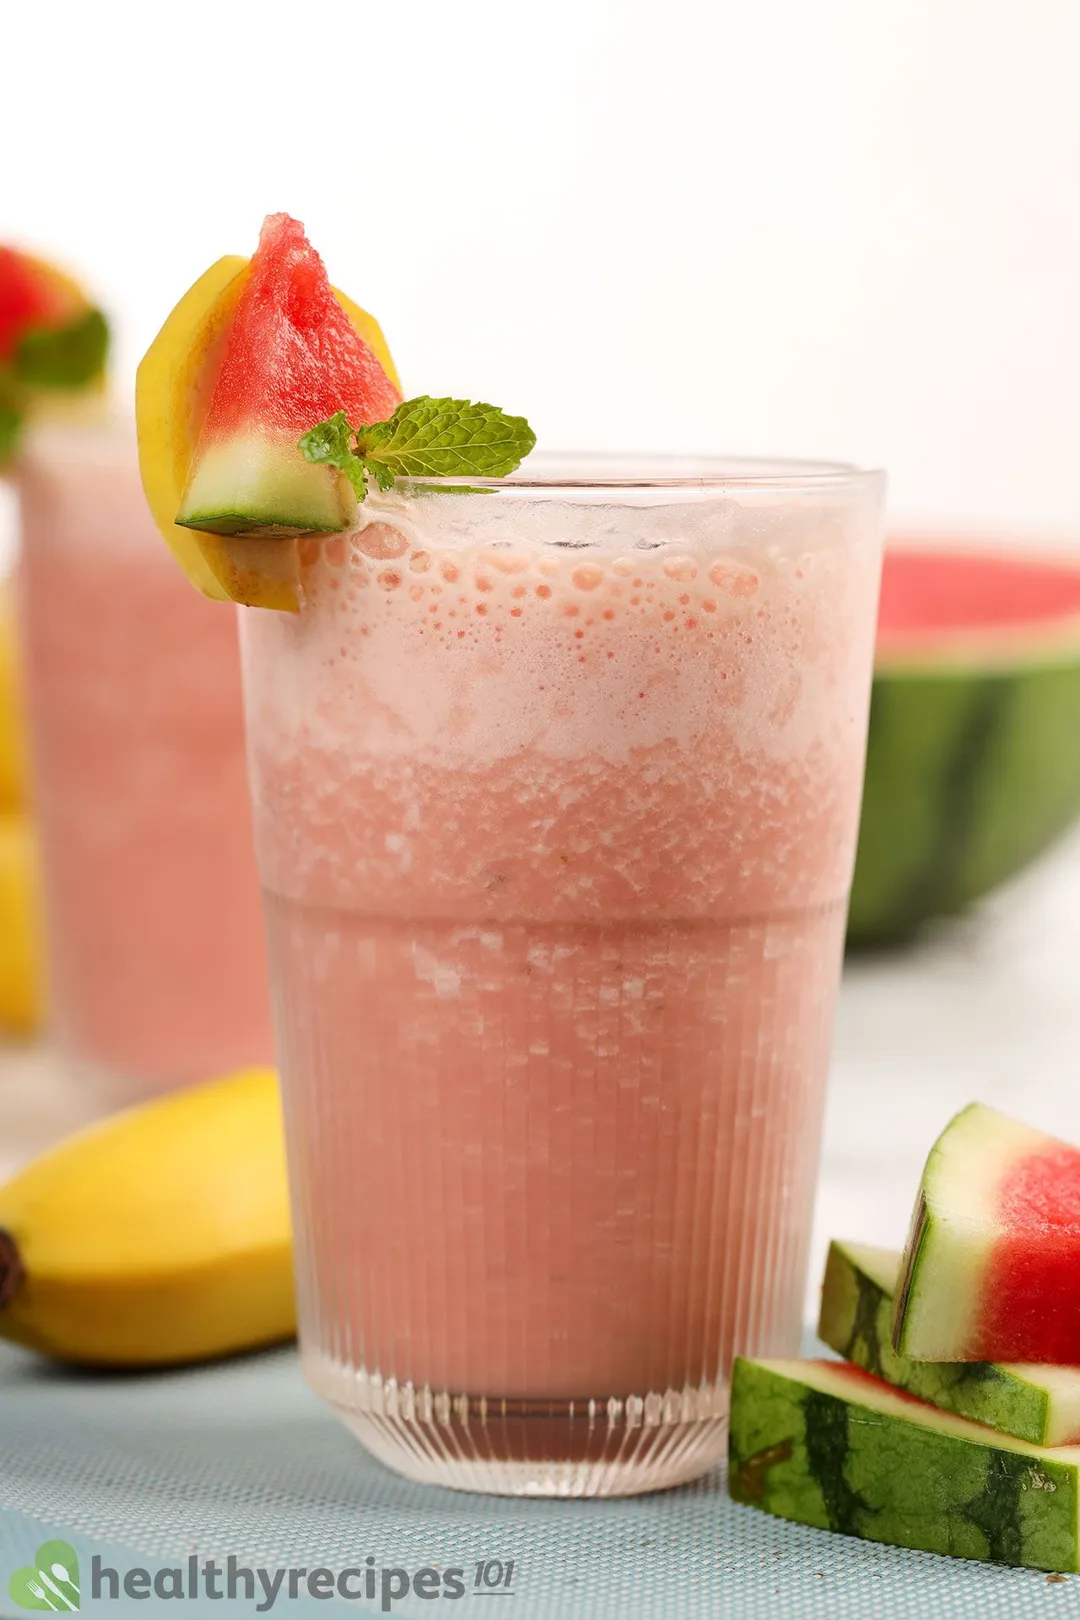 A glass of Watermelon Banana Smoothie placed near watermelon slices and a banana.